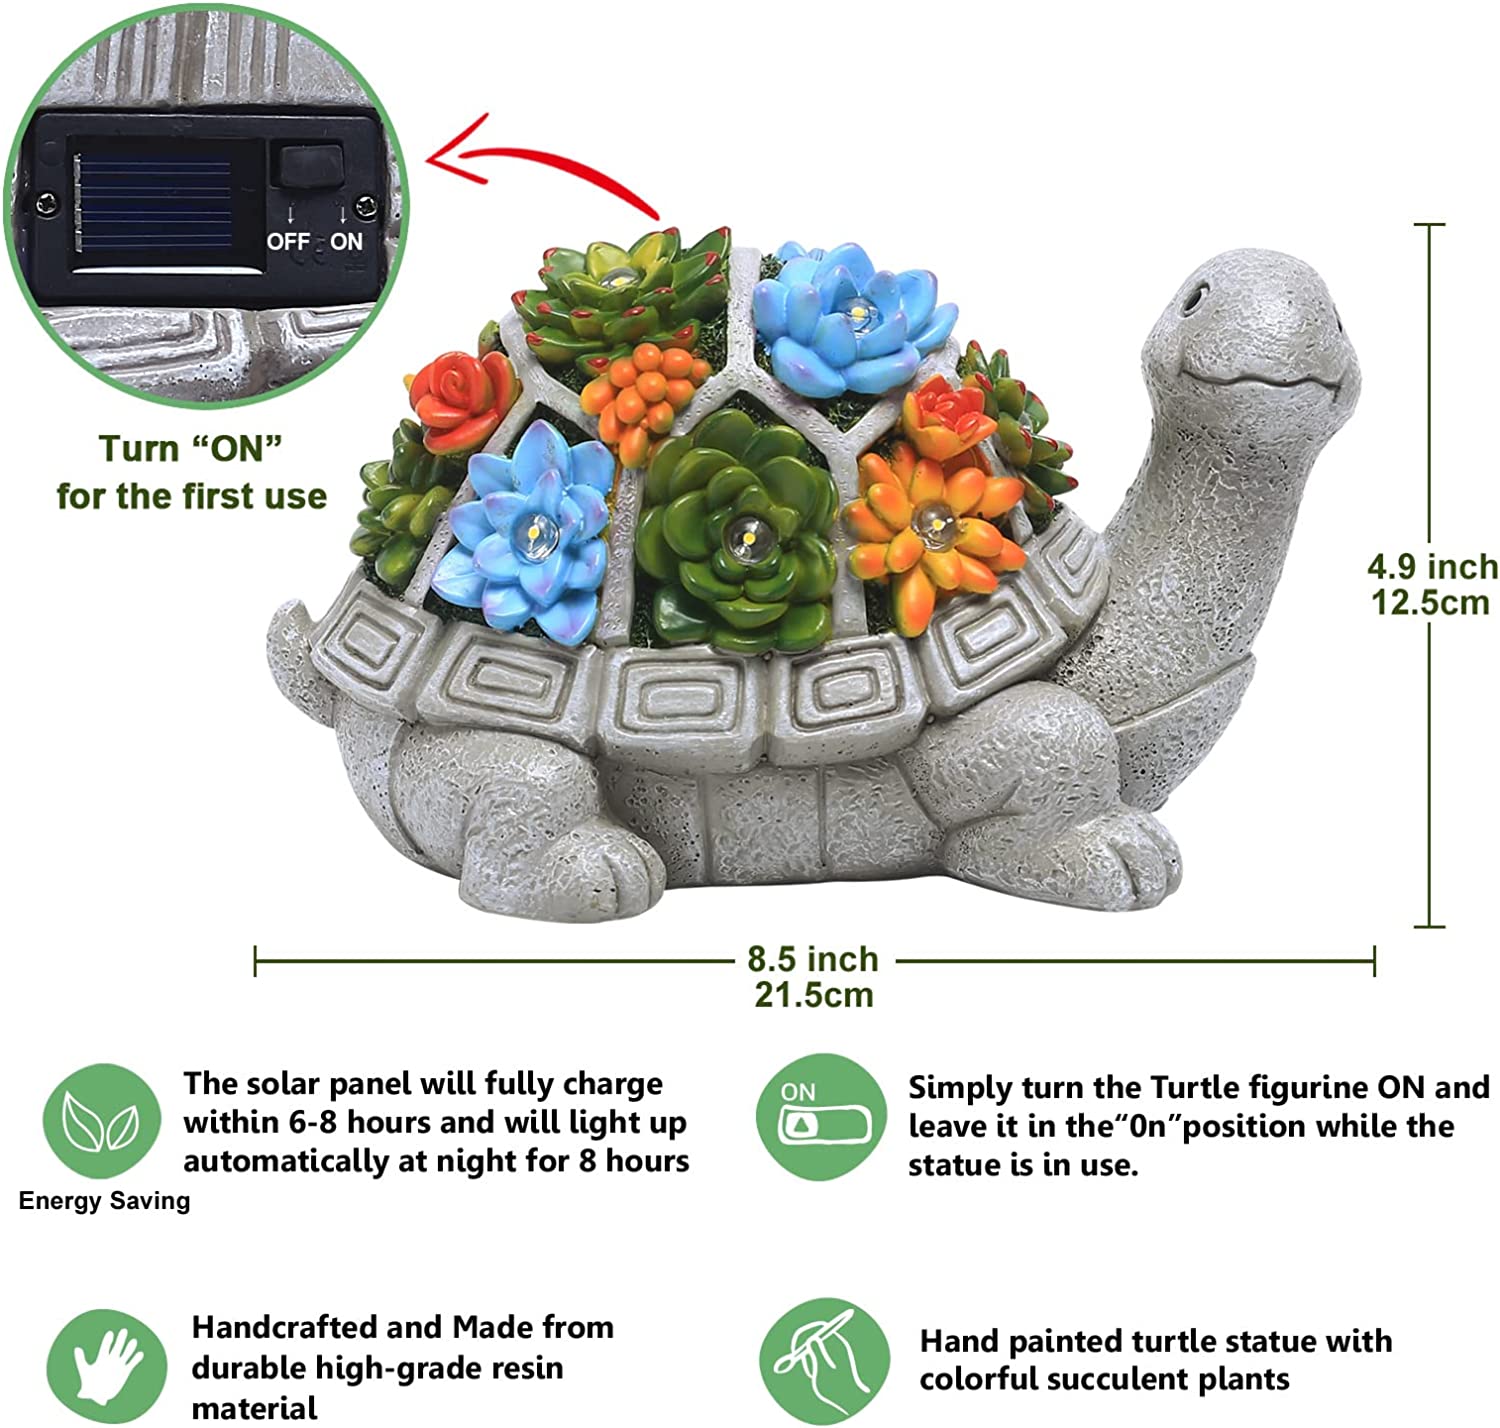 Nacome Solar Garden Outdoor Statues Turtle with Succulent and 7 LED Lights-Outdoor Lawn Decor Garden Tortoise Statue for Patio-Balcony-Yard-Lawn Ornament-Unique Housewarming Gifts-Stumbit Gardening